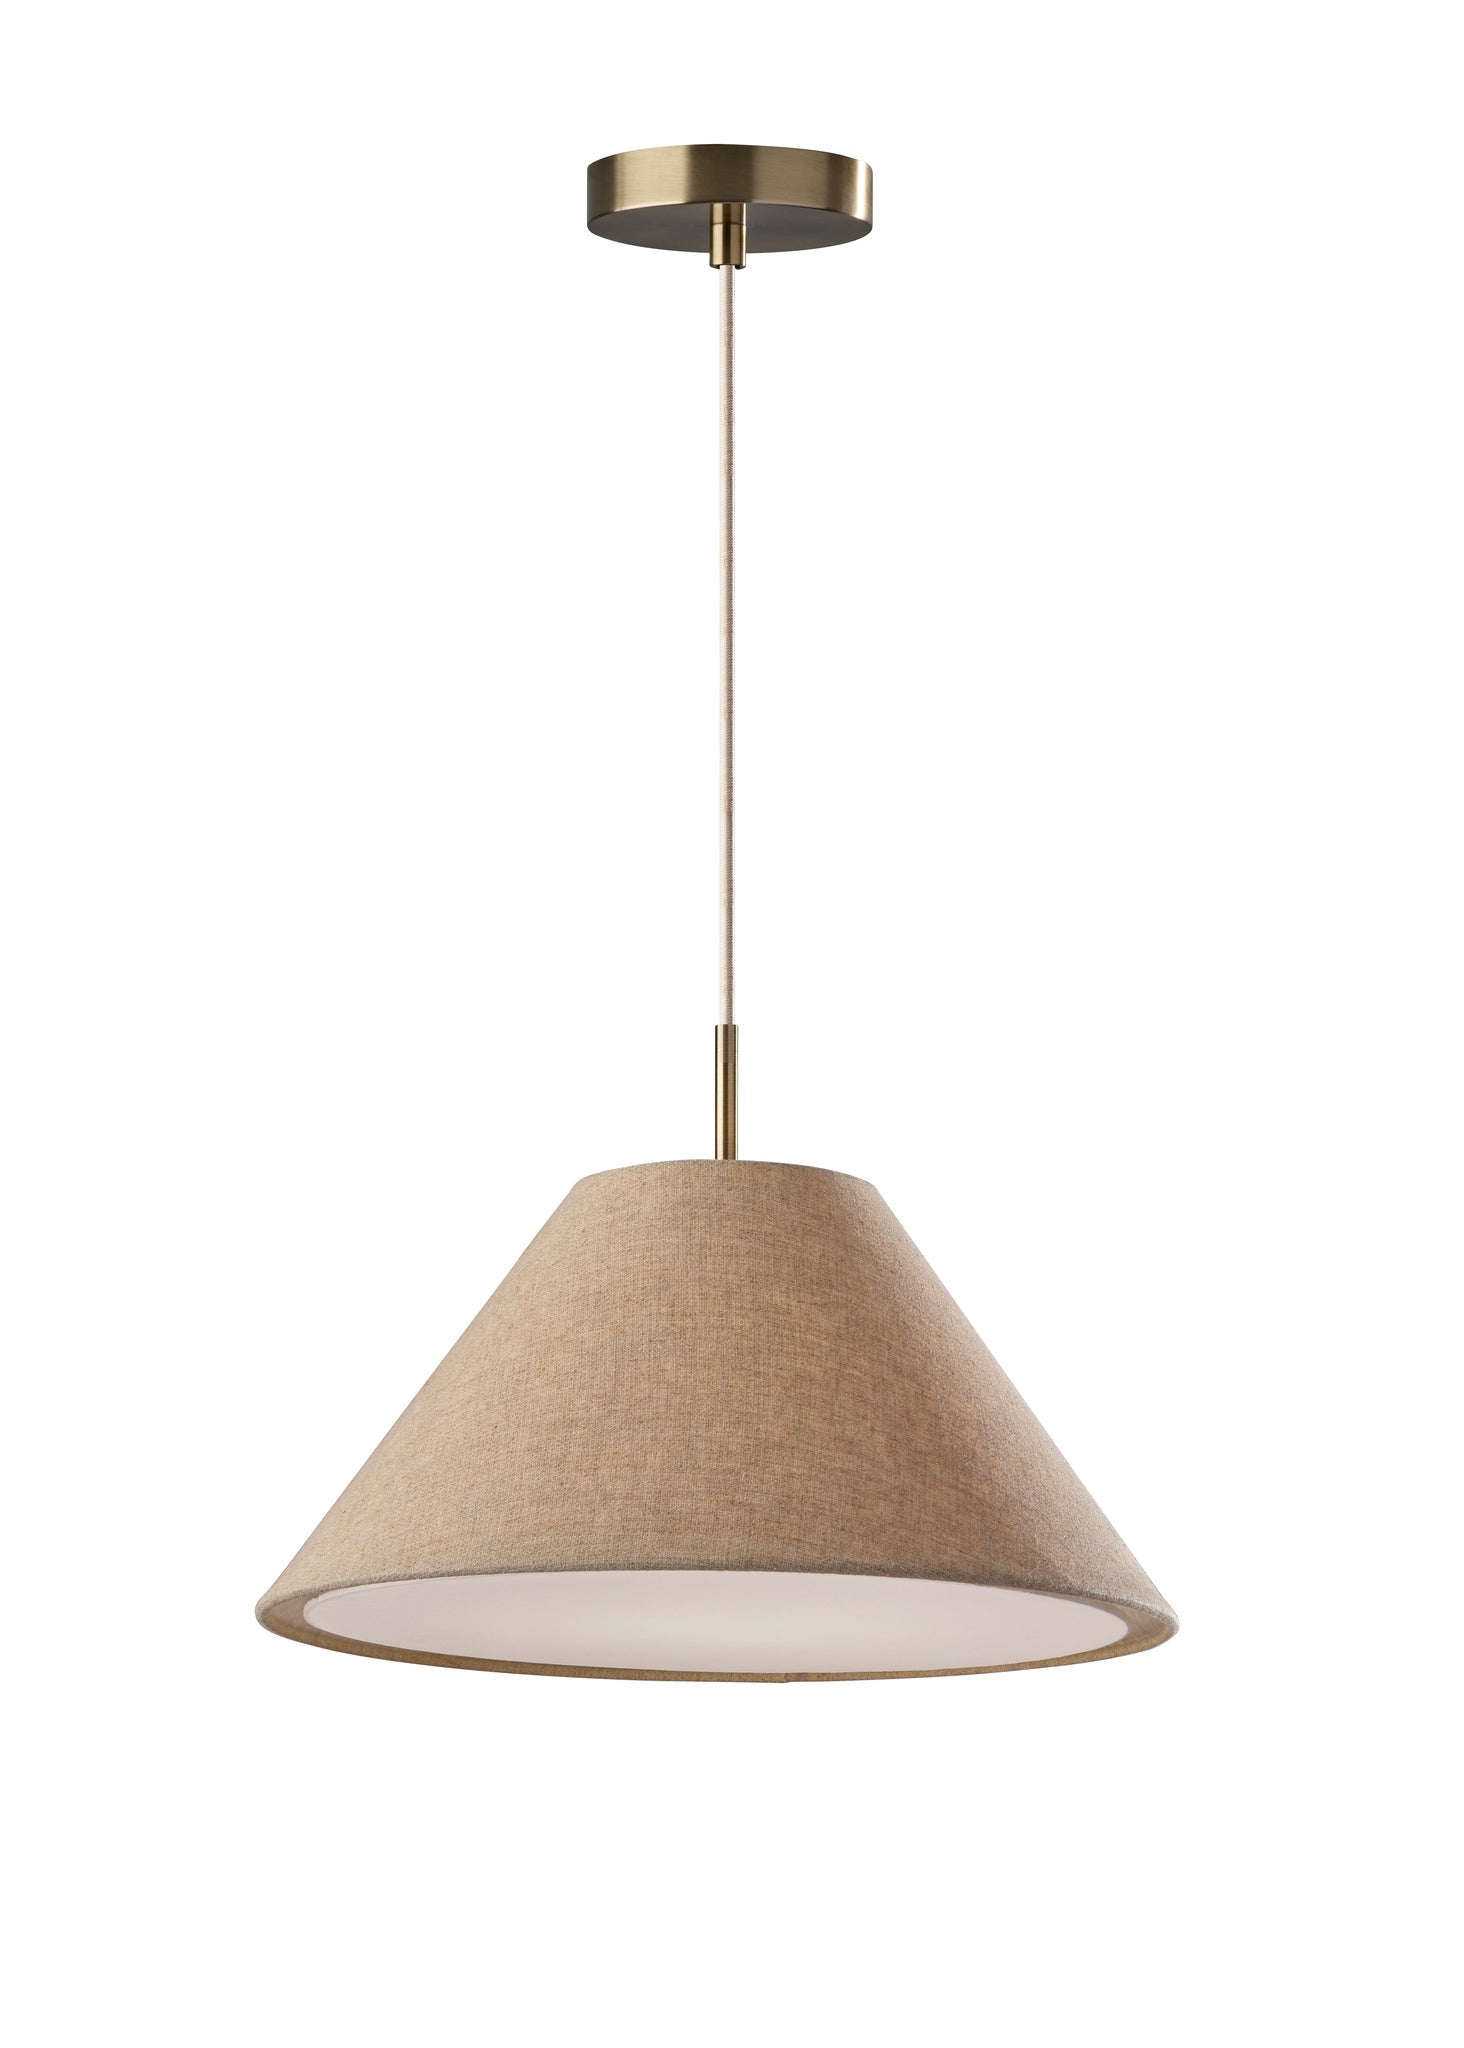 Adesso Ceiling Lamps - Hadley Pendant Light Brown Textured Fabric & Antique Brass